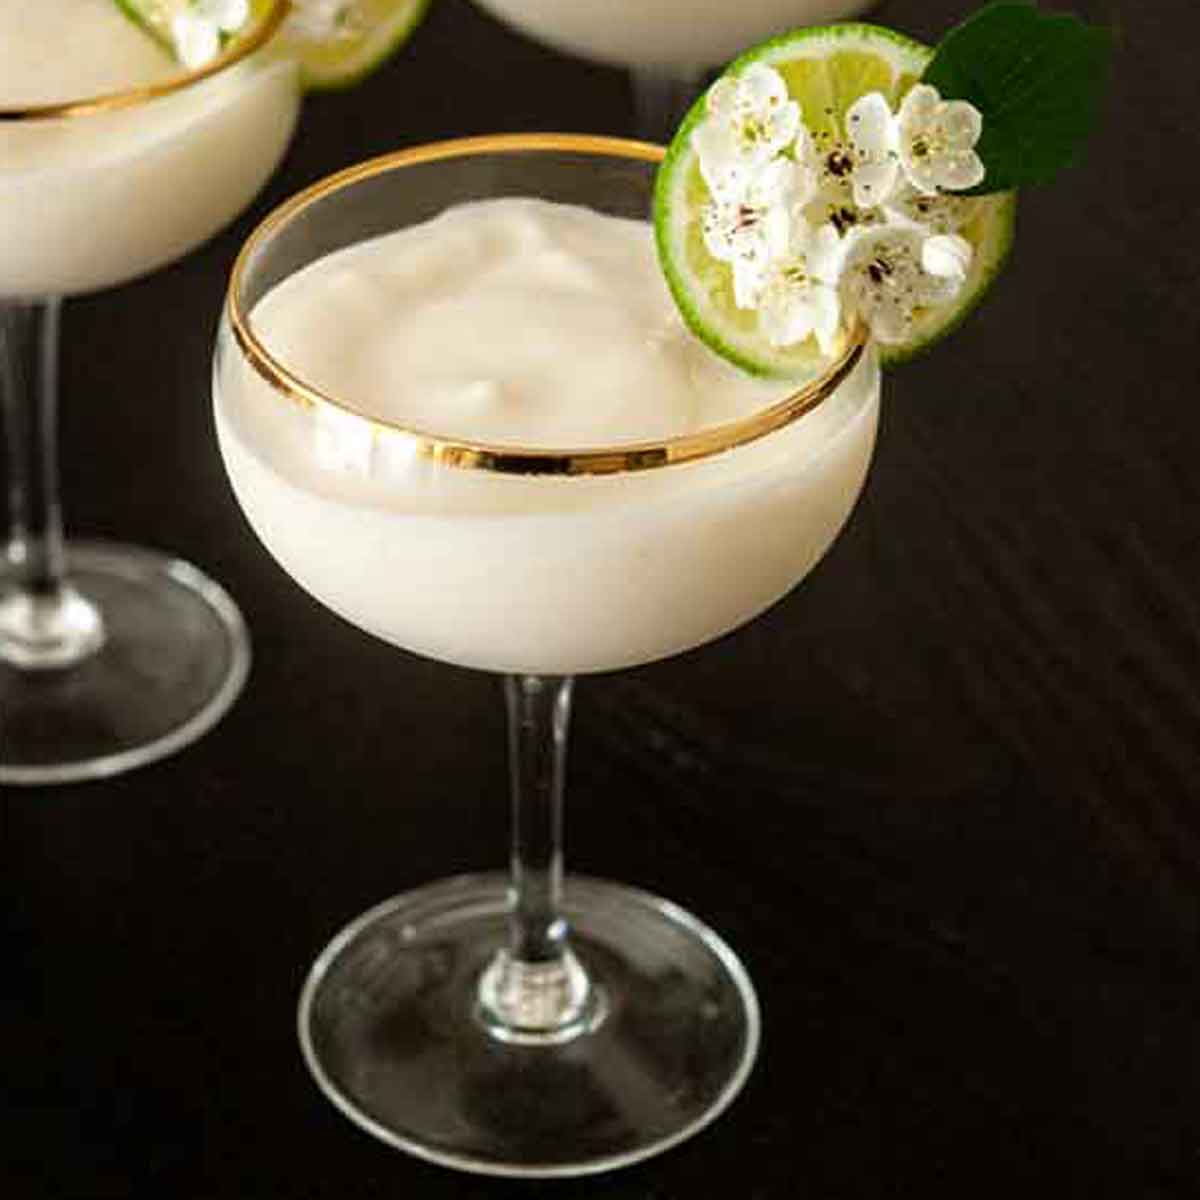 A piña colada in coup glasses, garnished with a lime and flowers on a table.